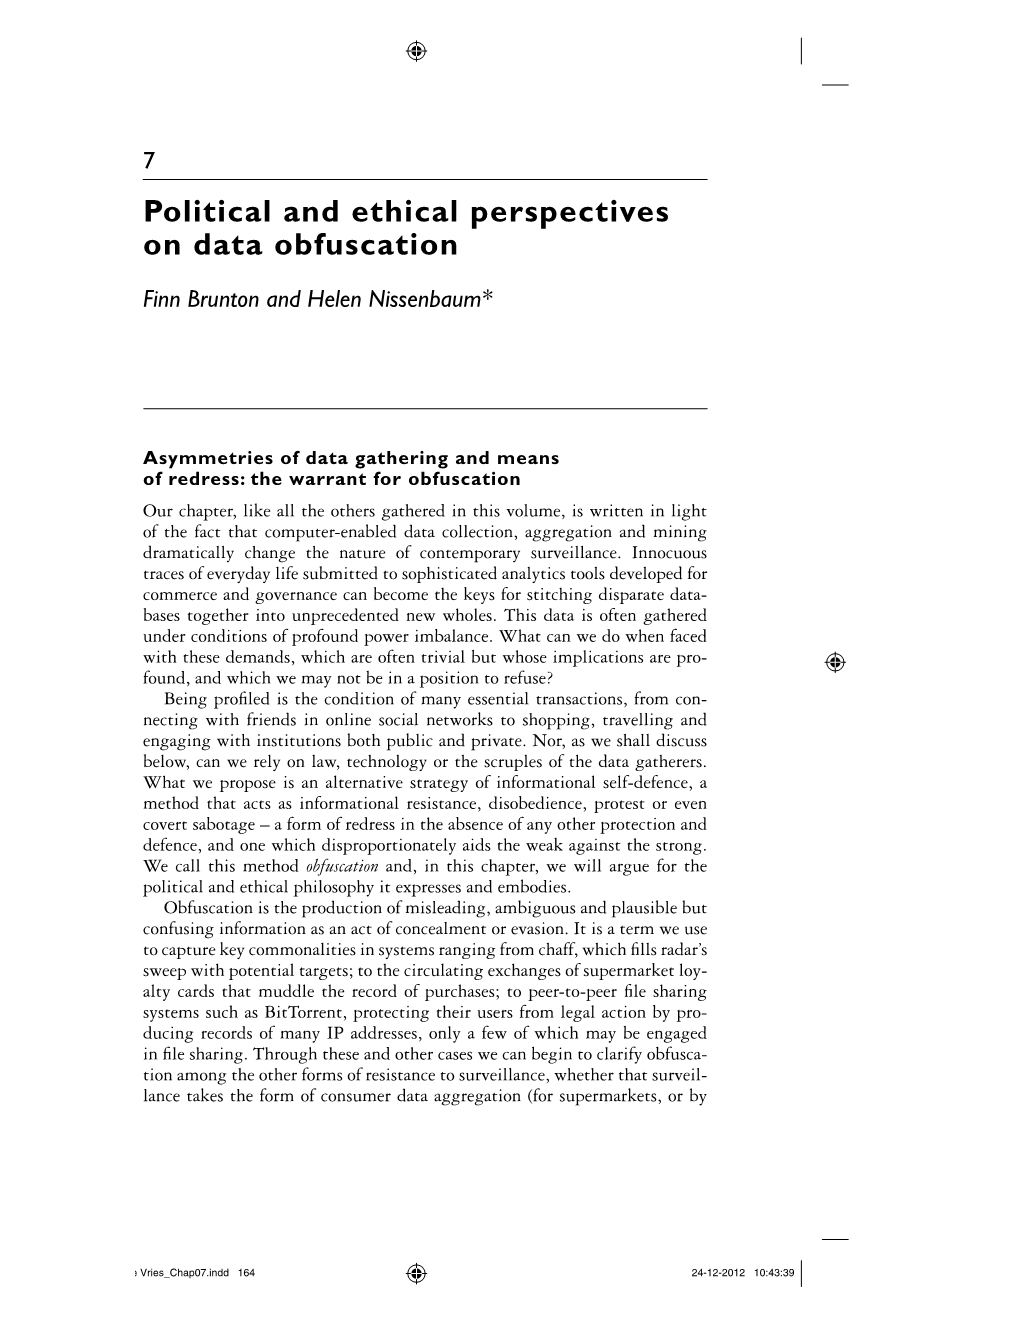 Political and Ethical Perspectives on Data Obfuscation 165